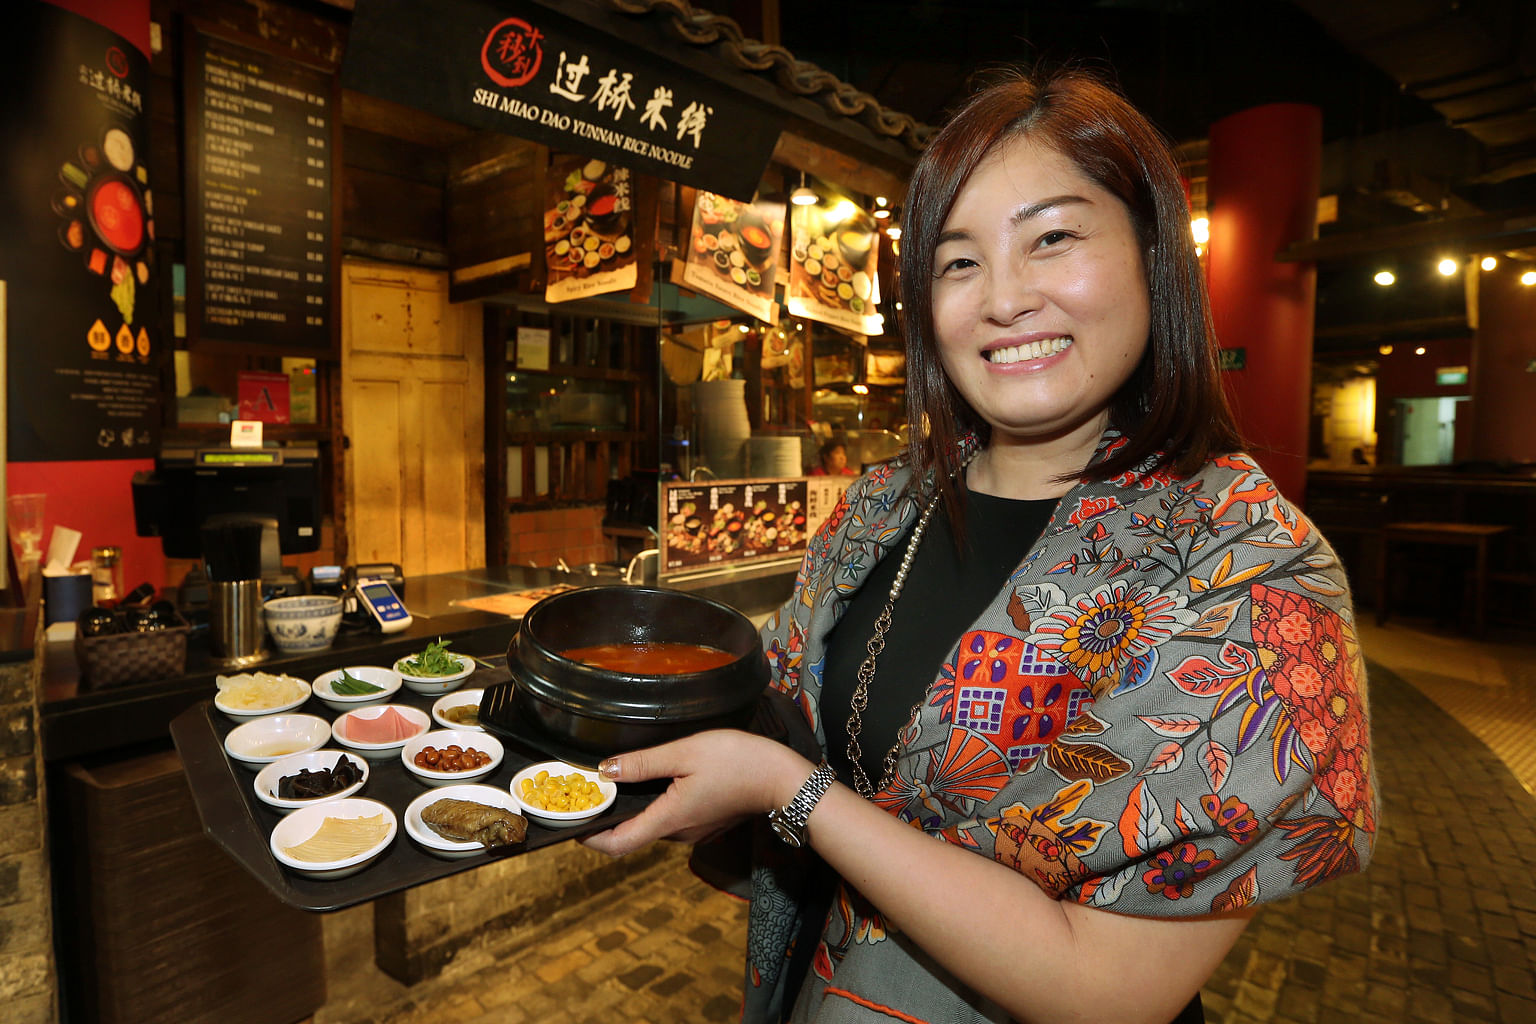 Ms Crystal Chou, owner of Shi Miao Dao Yunnan Rice Noodles in Singapore, with the Tomato noodle set, which comes with 11 side items.